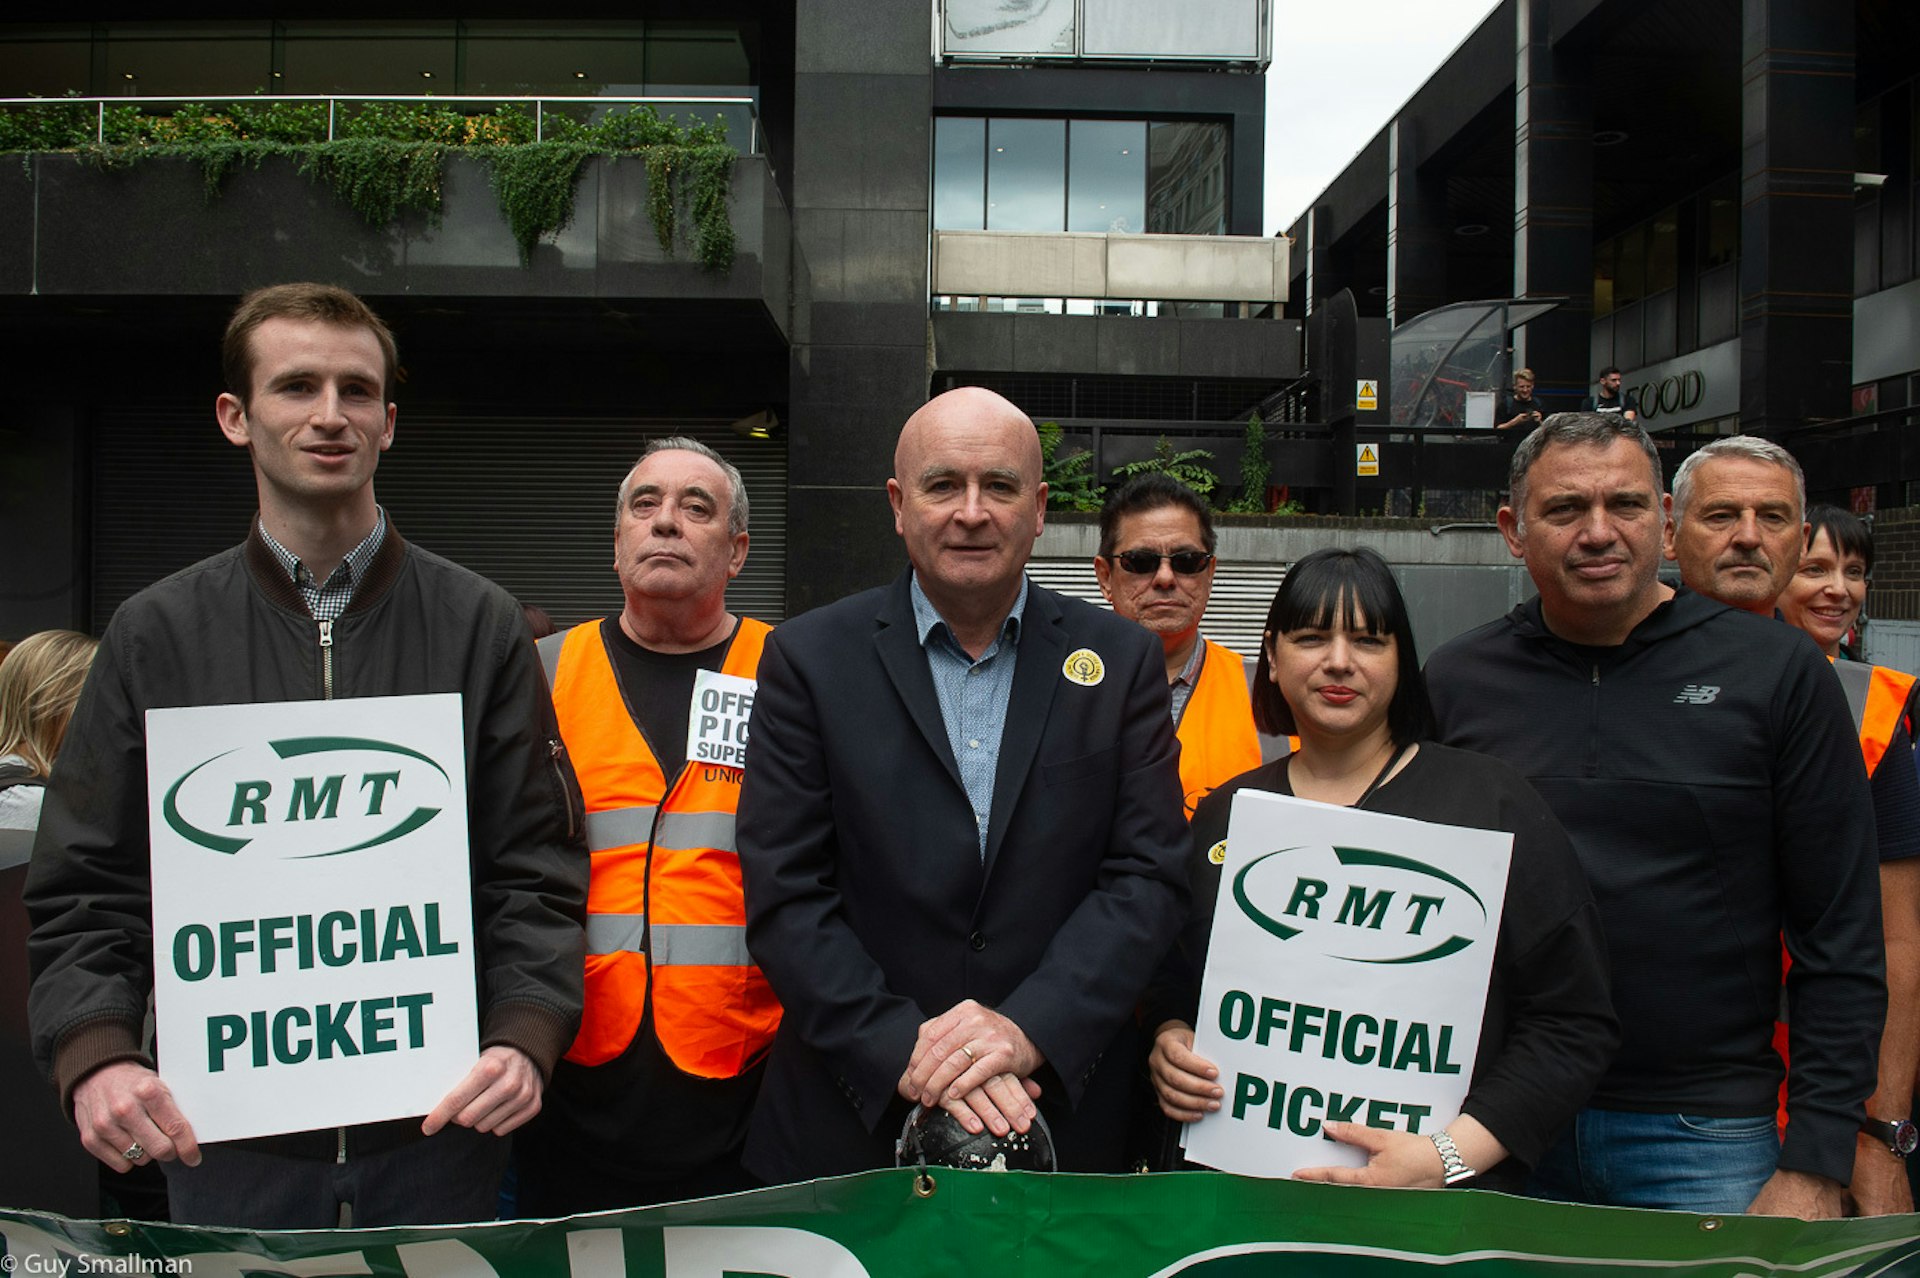 Rail strikes: photos of worker solidarity on the picket lines